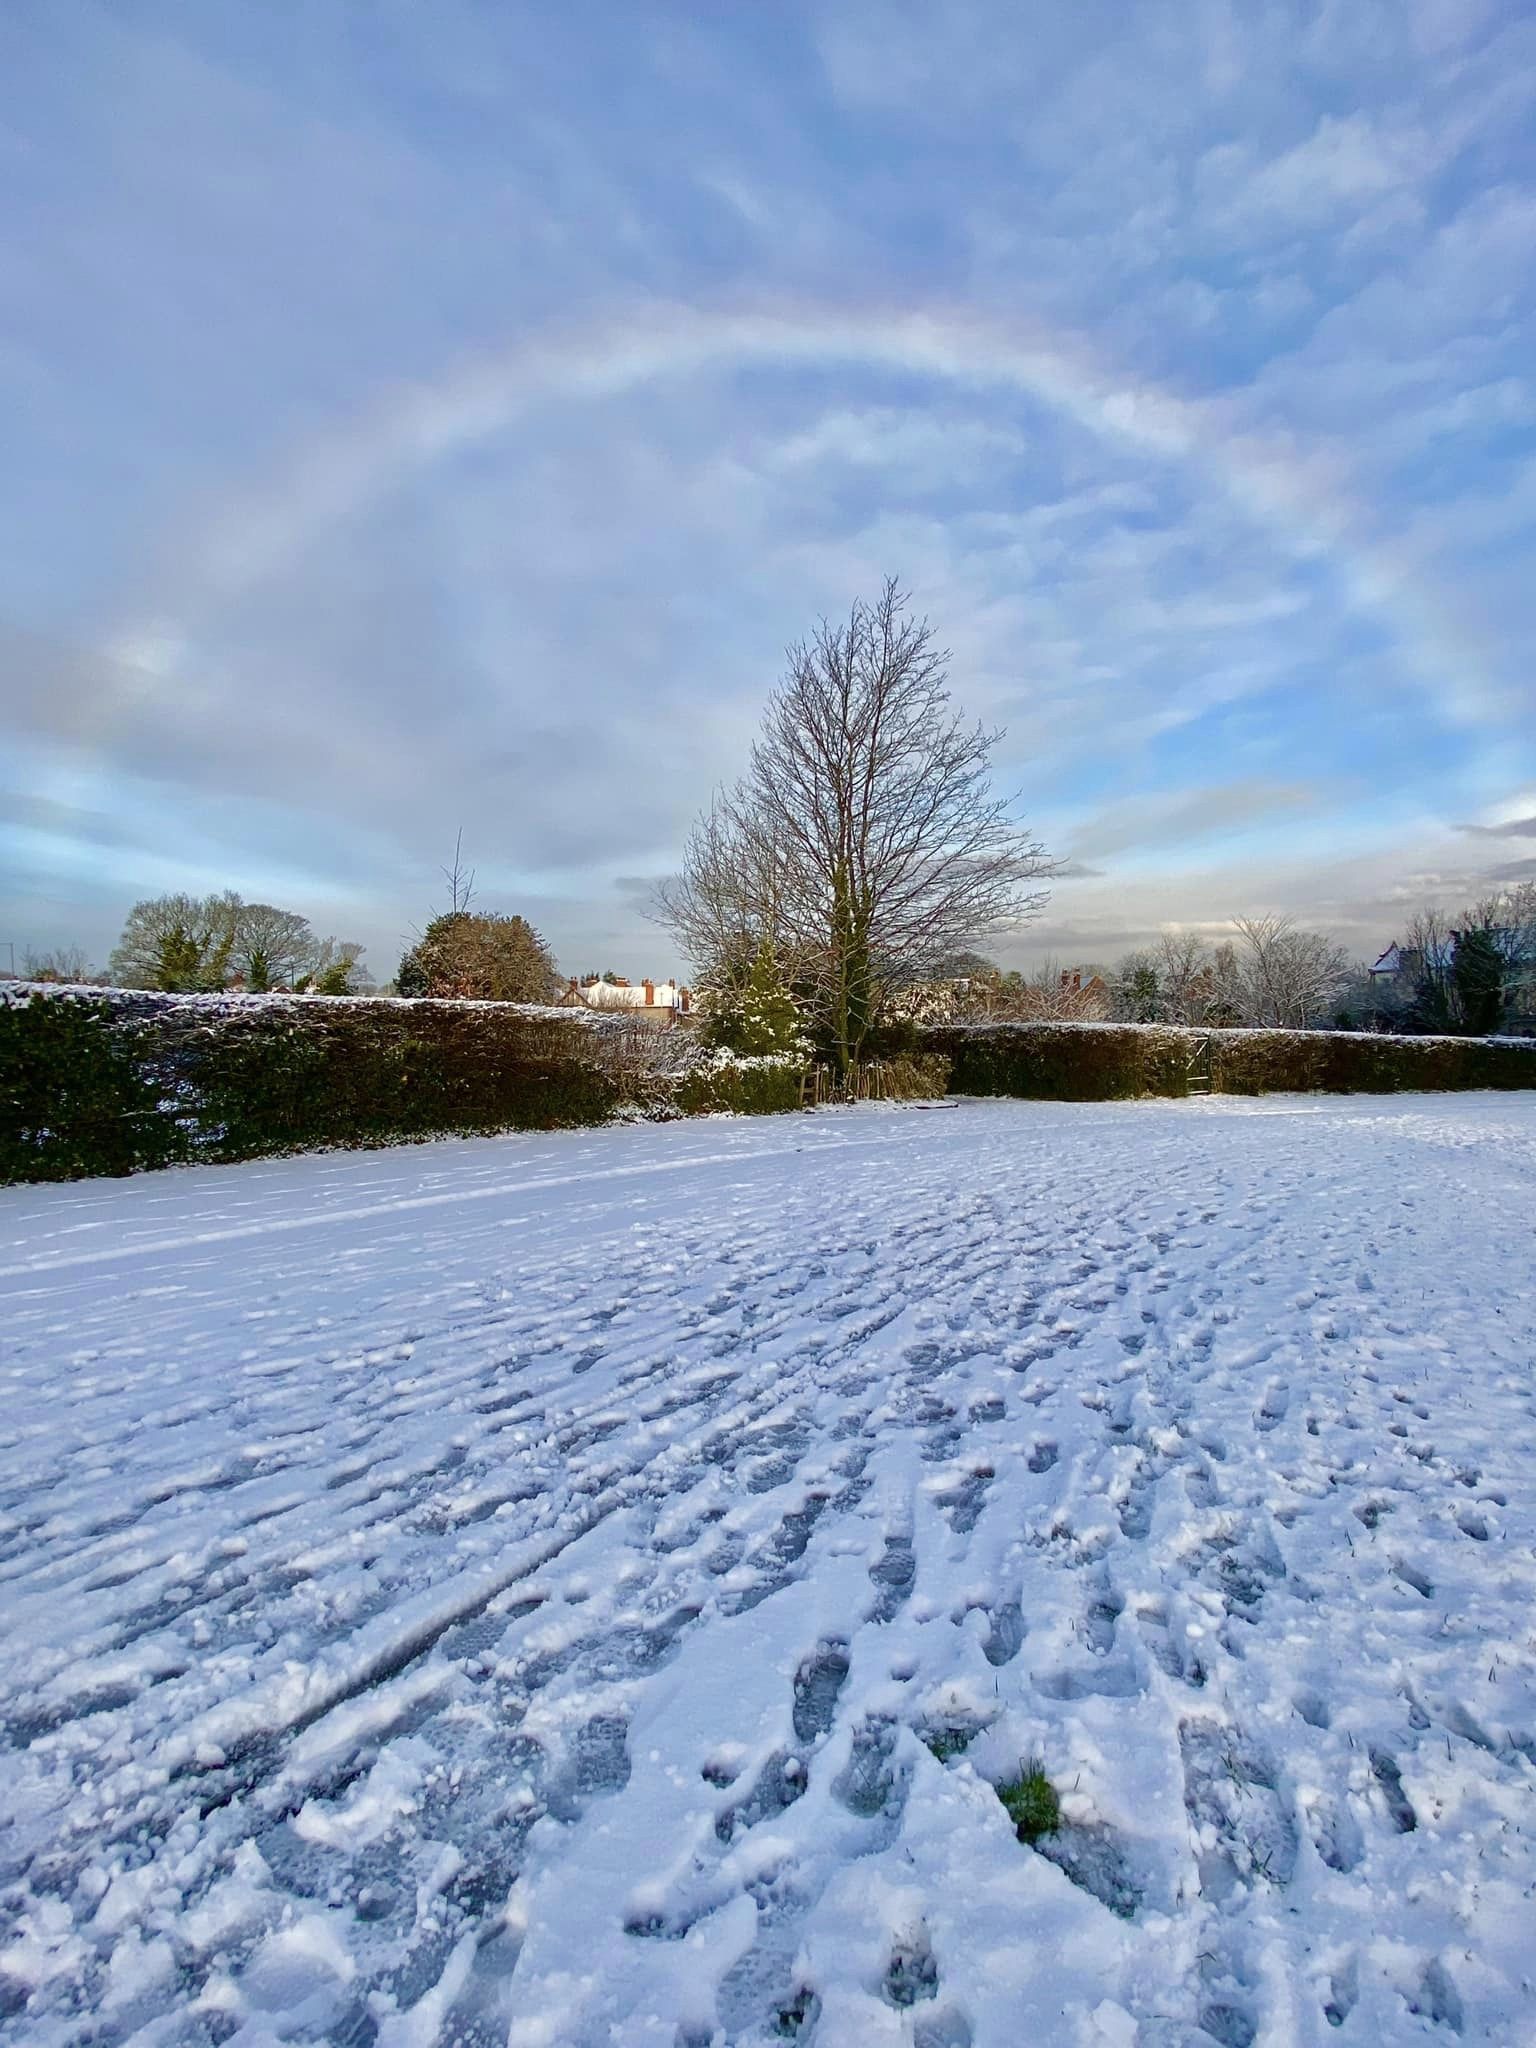 A snowbow in Birkenhead Park by Beryl Cooke